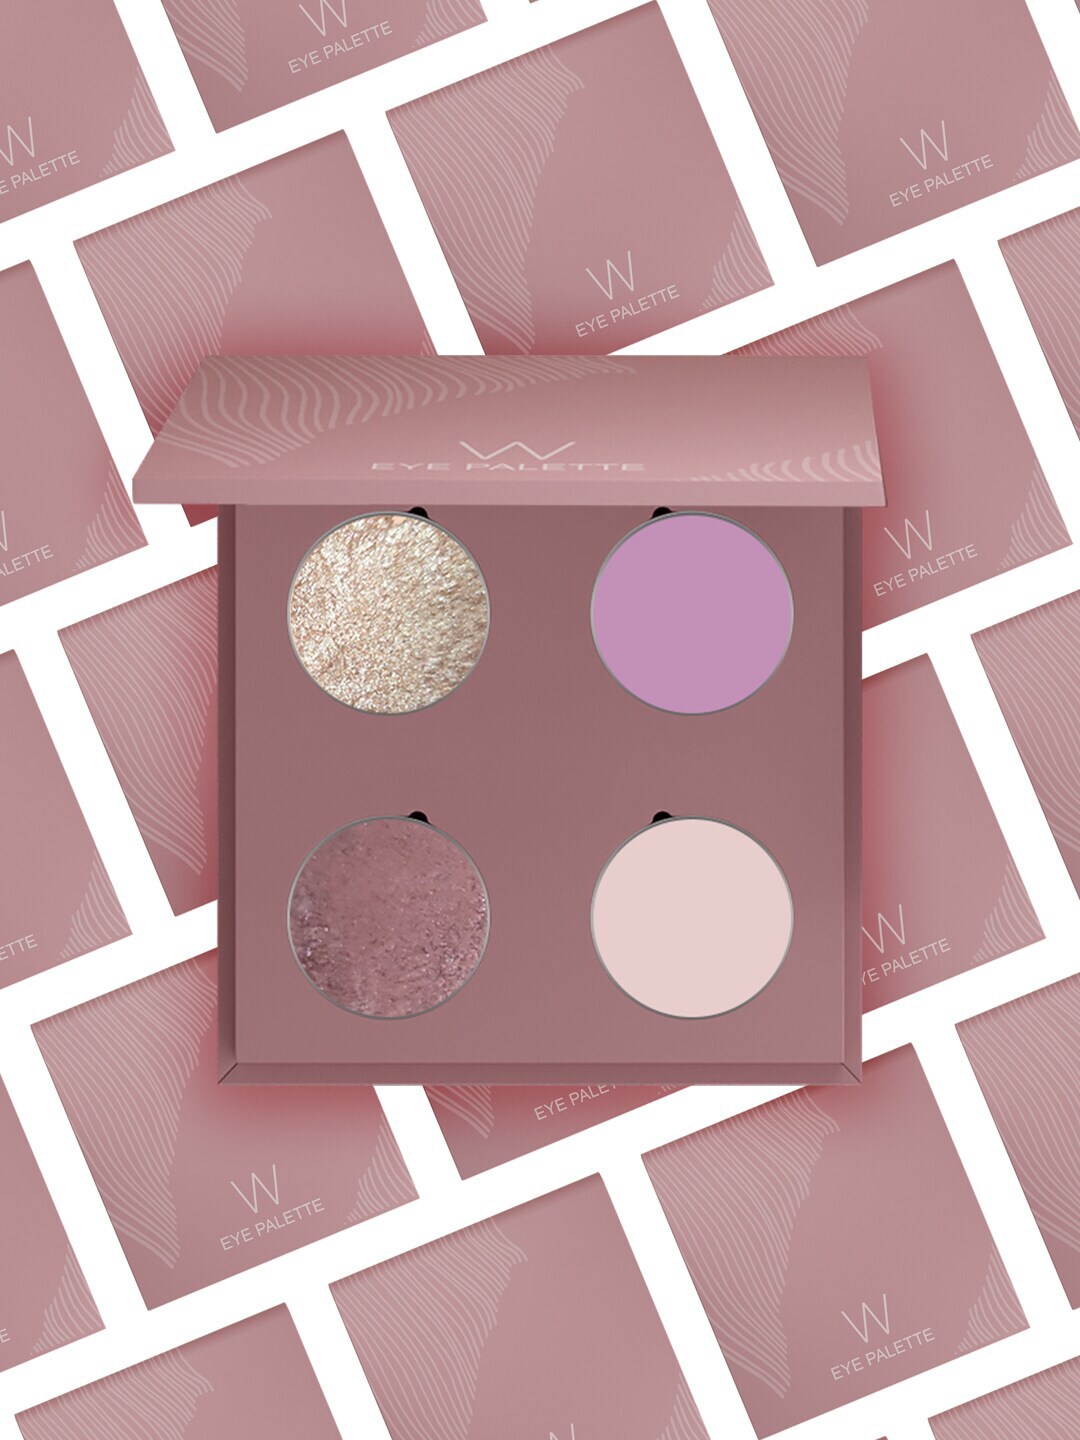 W Woman Misty Rose Eye Palette Price in India